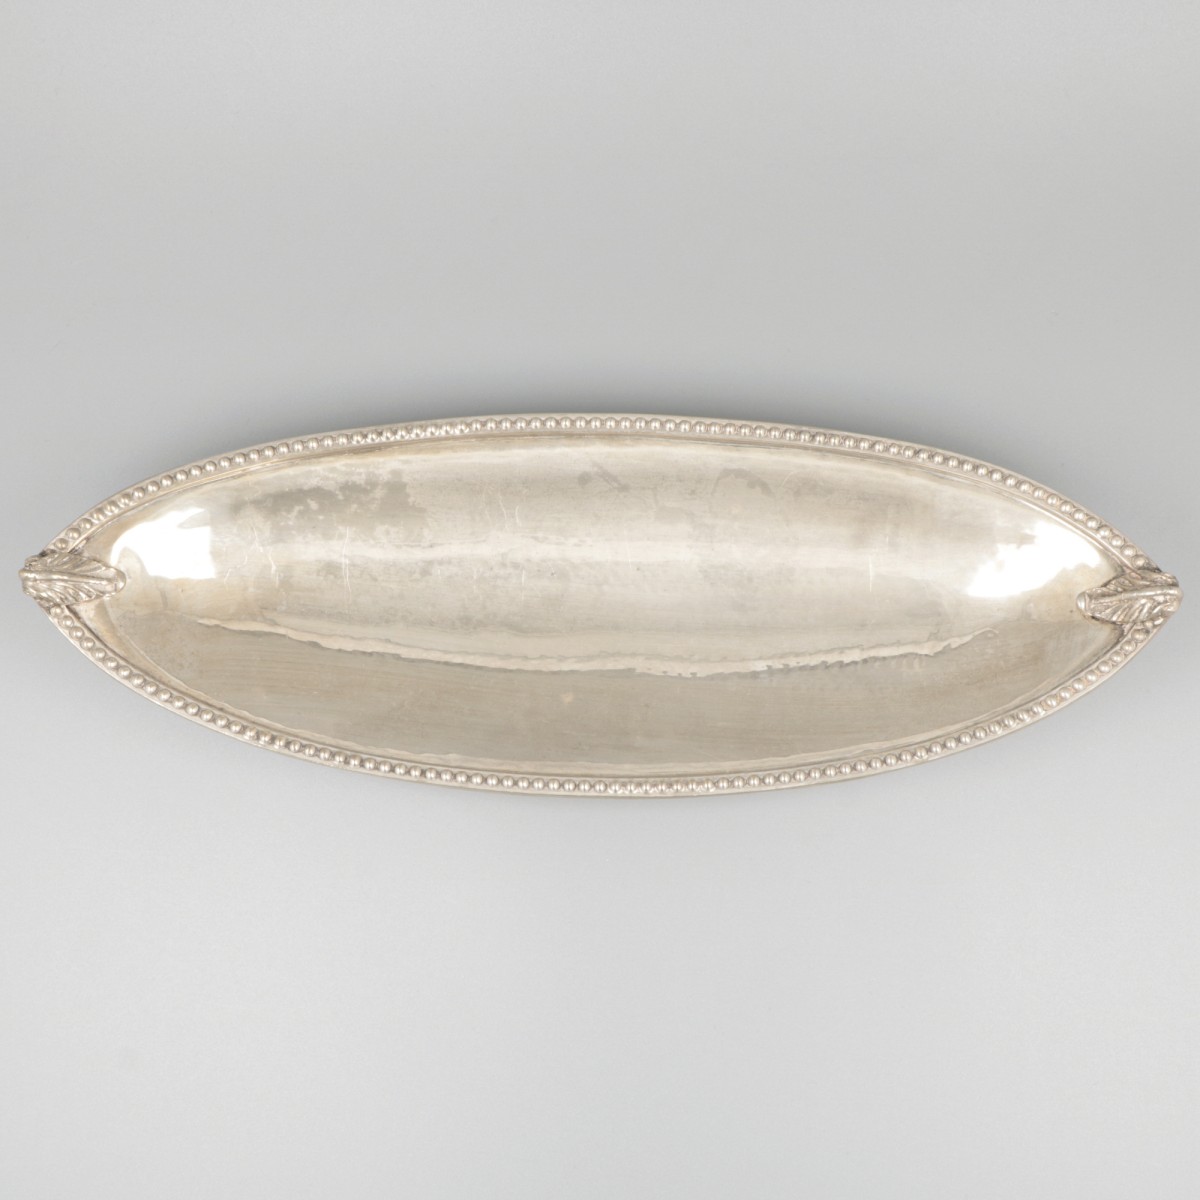 Delicacy bowl silver. - Image 2 of 5